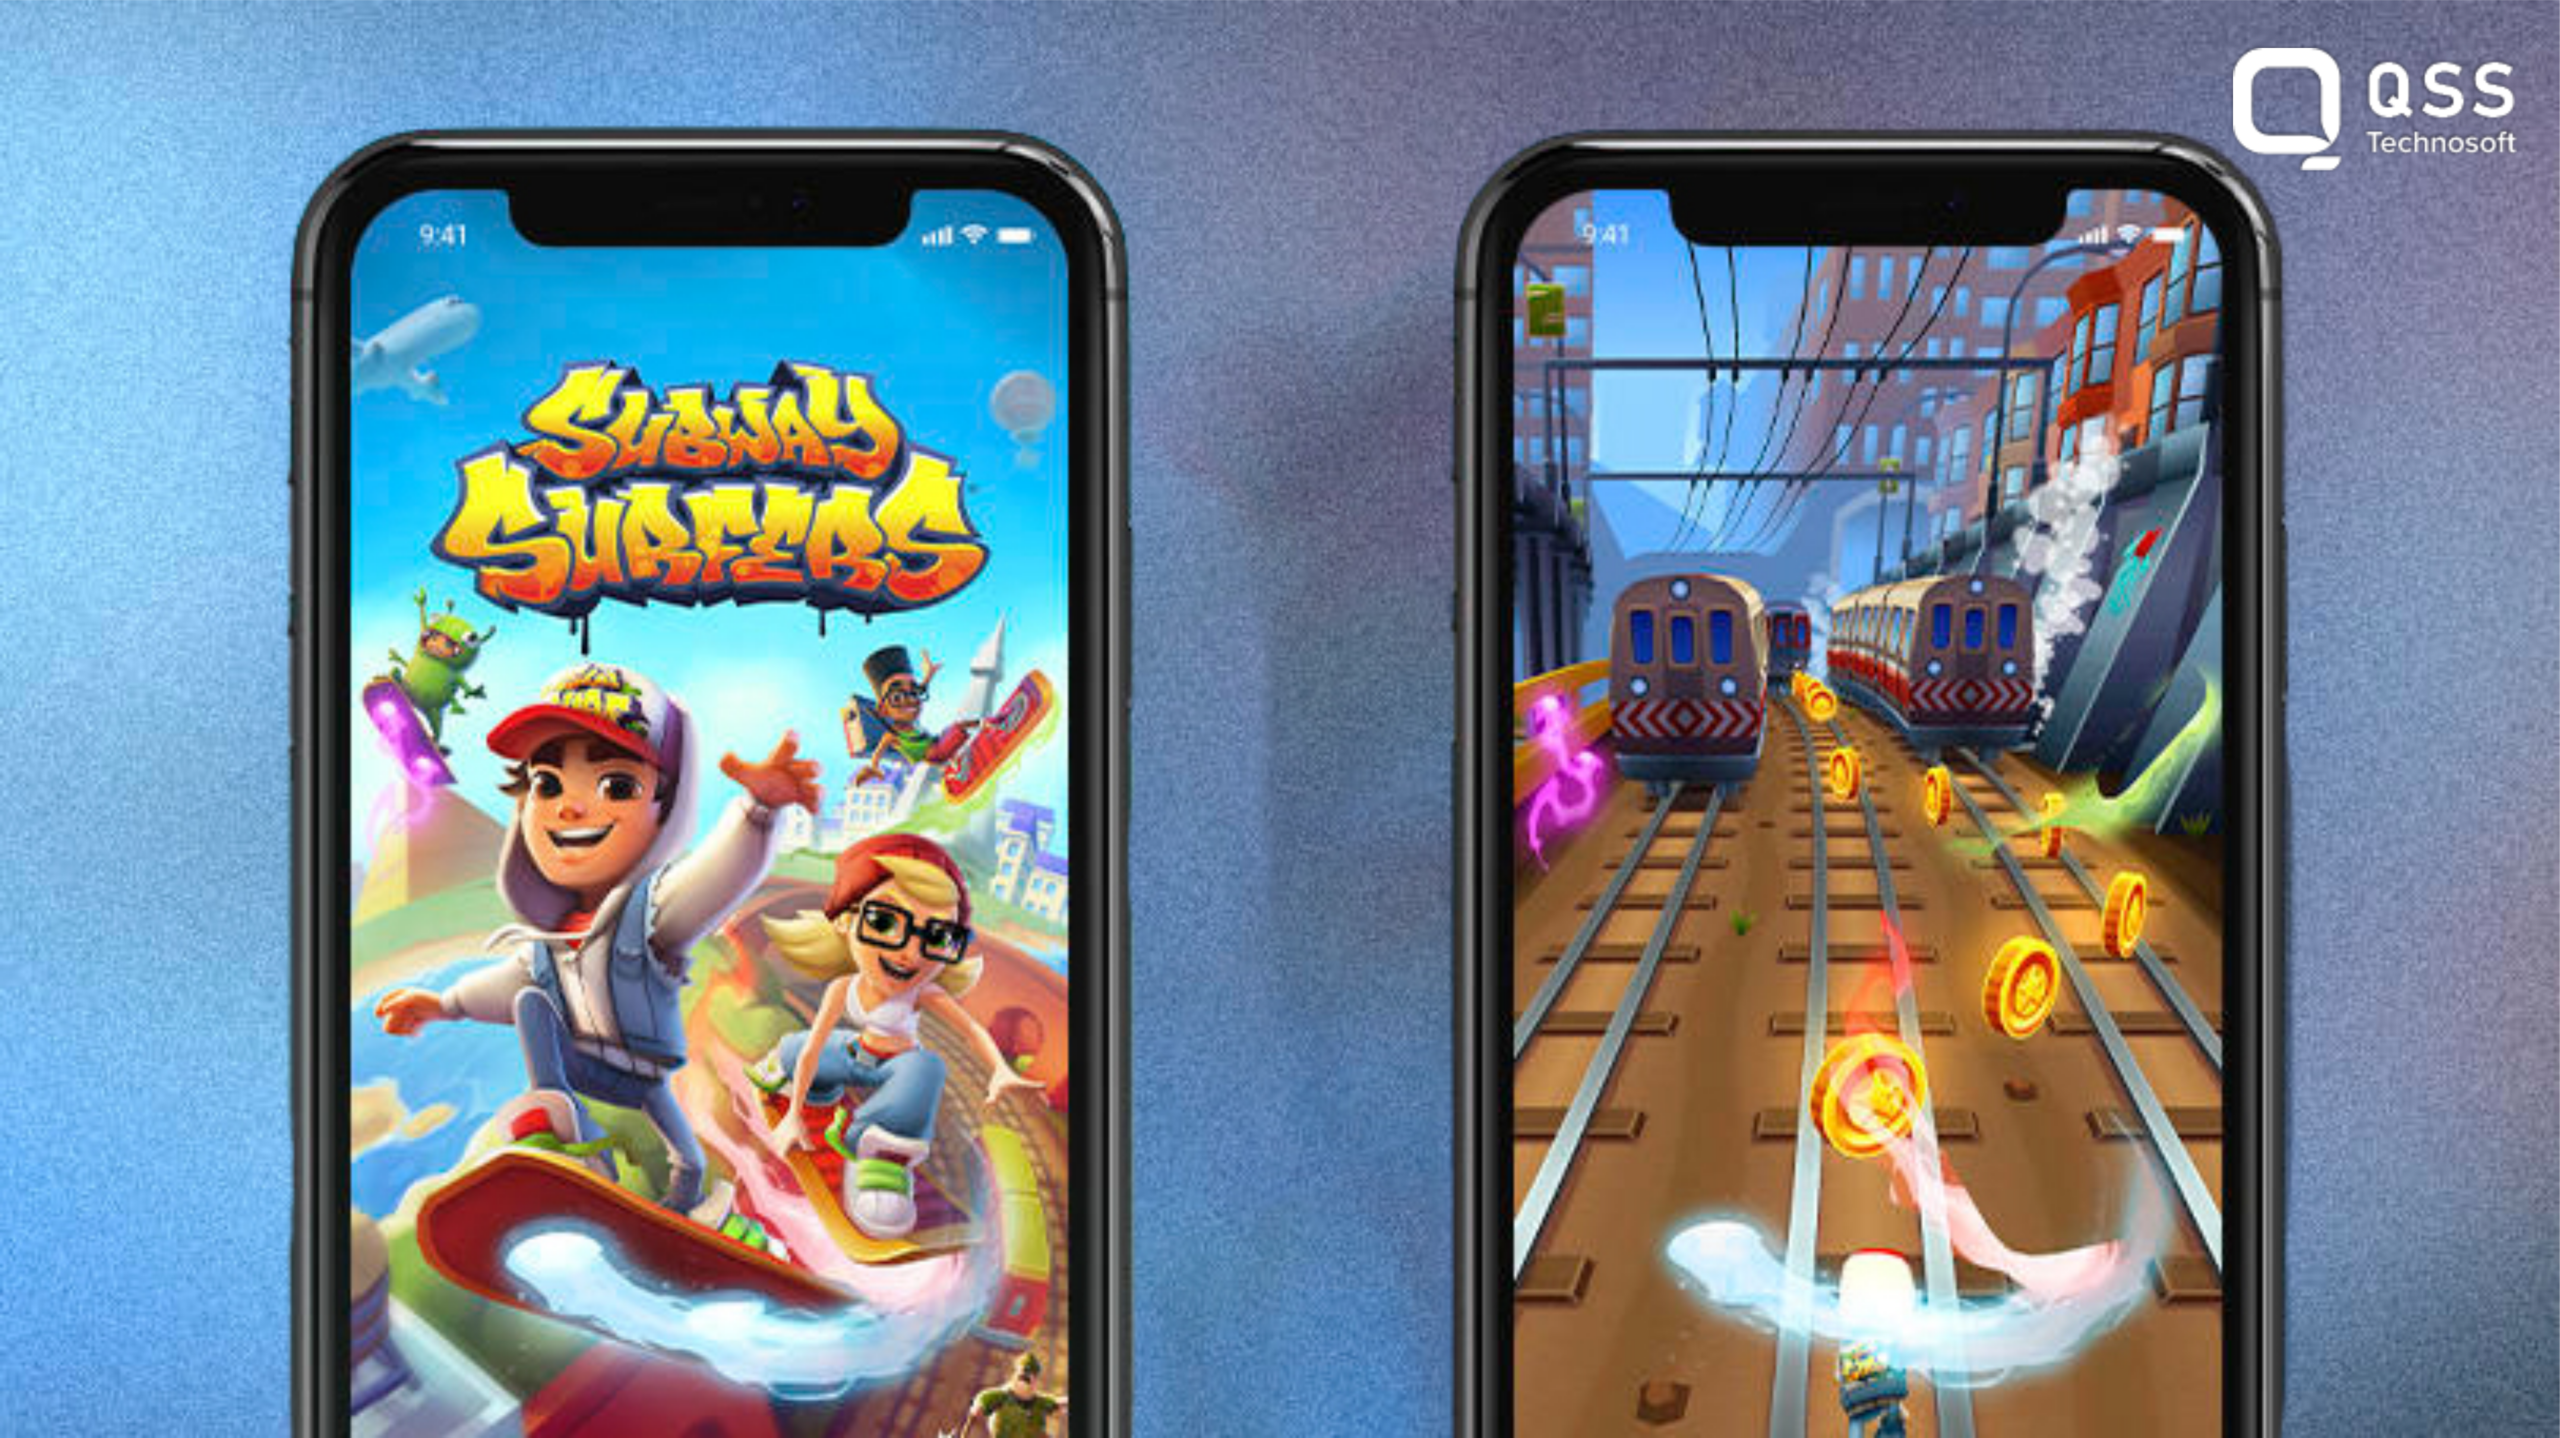 Subway Surfers' First Game in History to Run Past One Billion